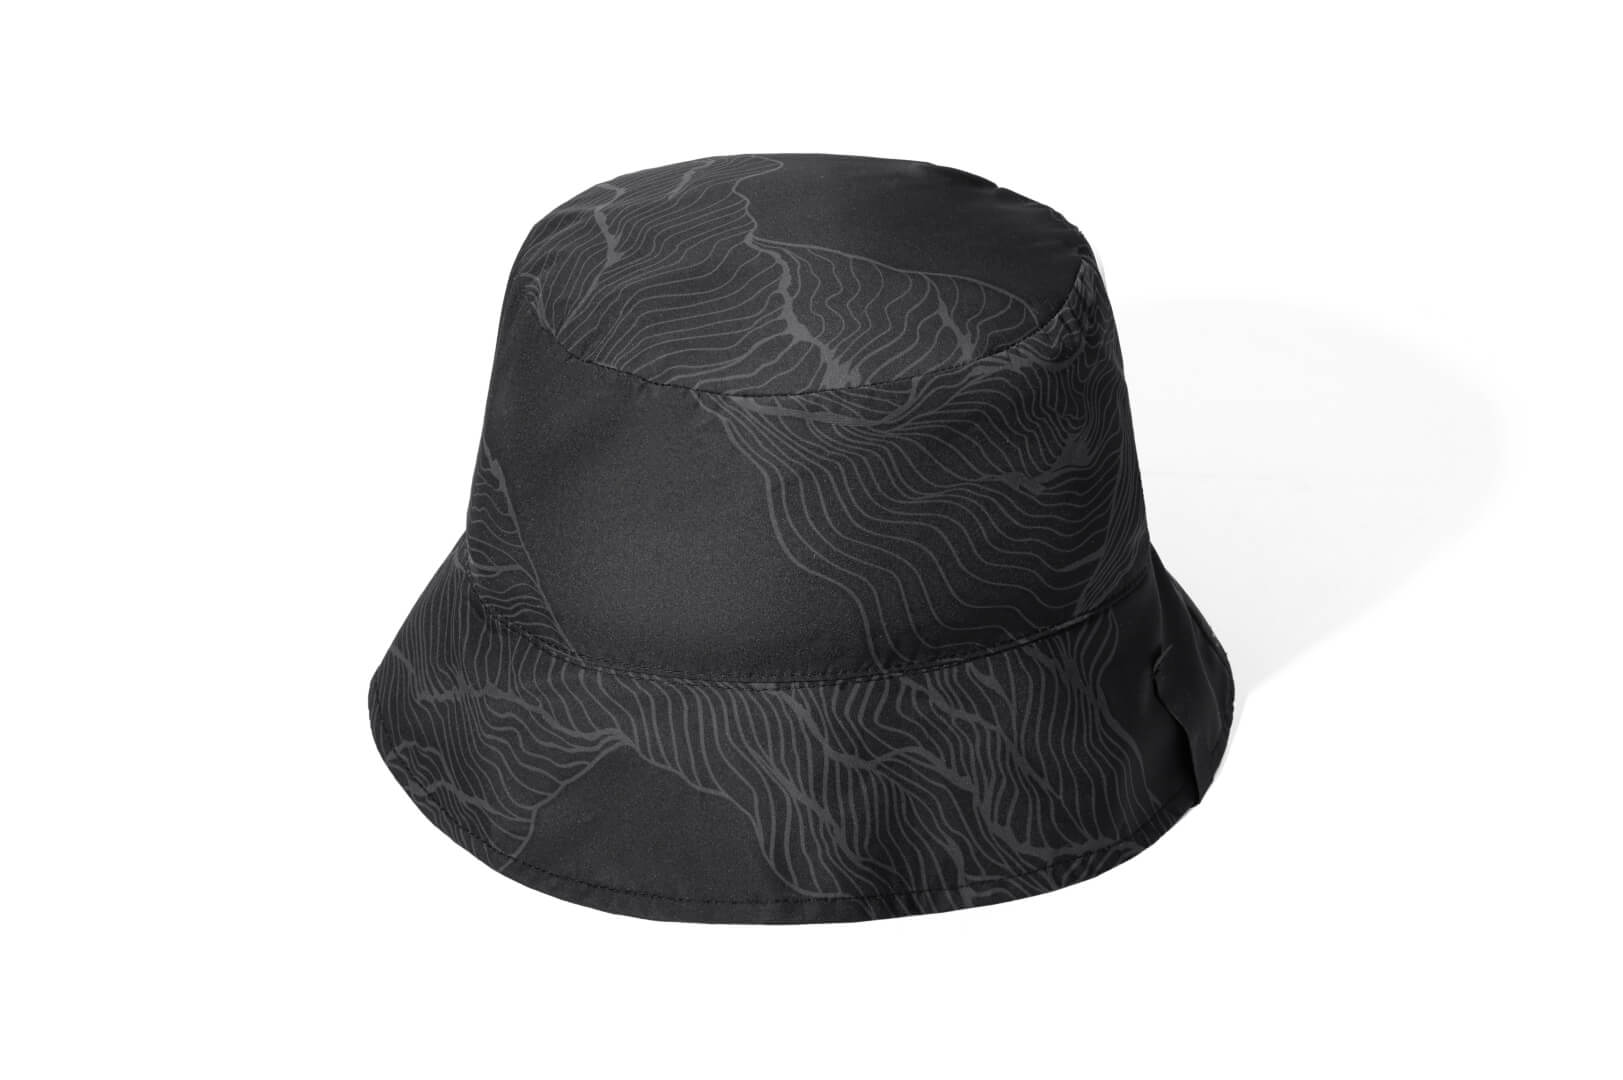 Kish Unisex Reversible Bucket Hat in Premium 3-Ply Micro Denier and 4-Way Durable Stretch Weave fabrications, with one side tonal and reverse printed, in Black Desert/Black